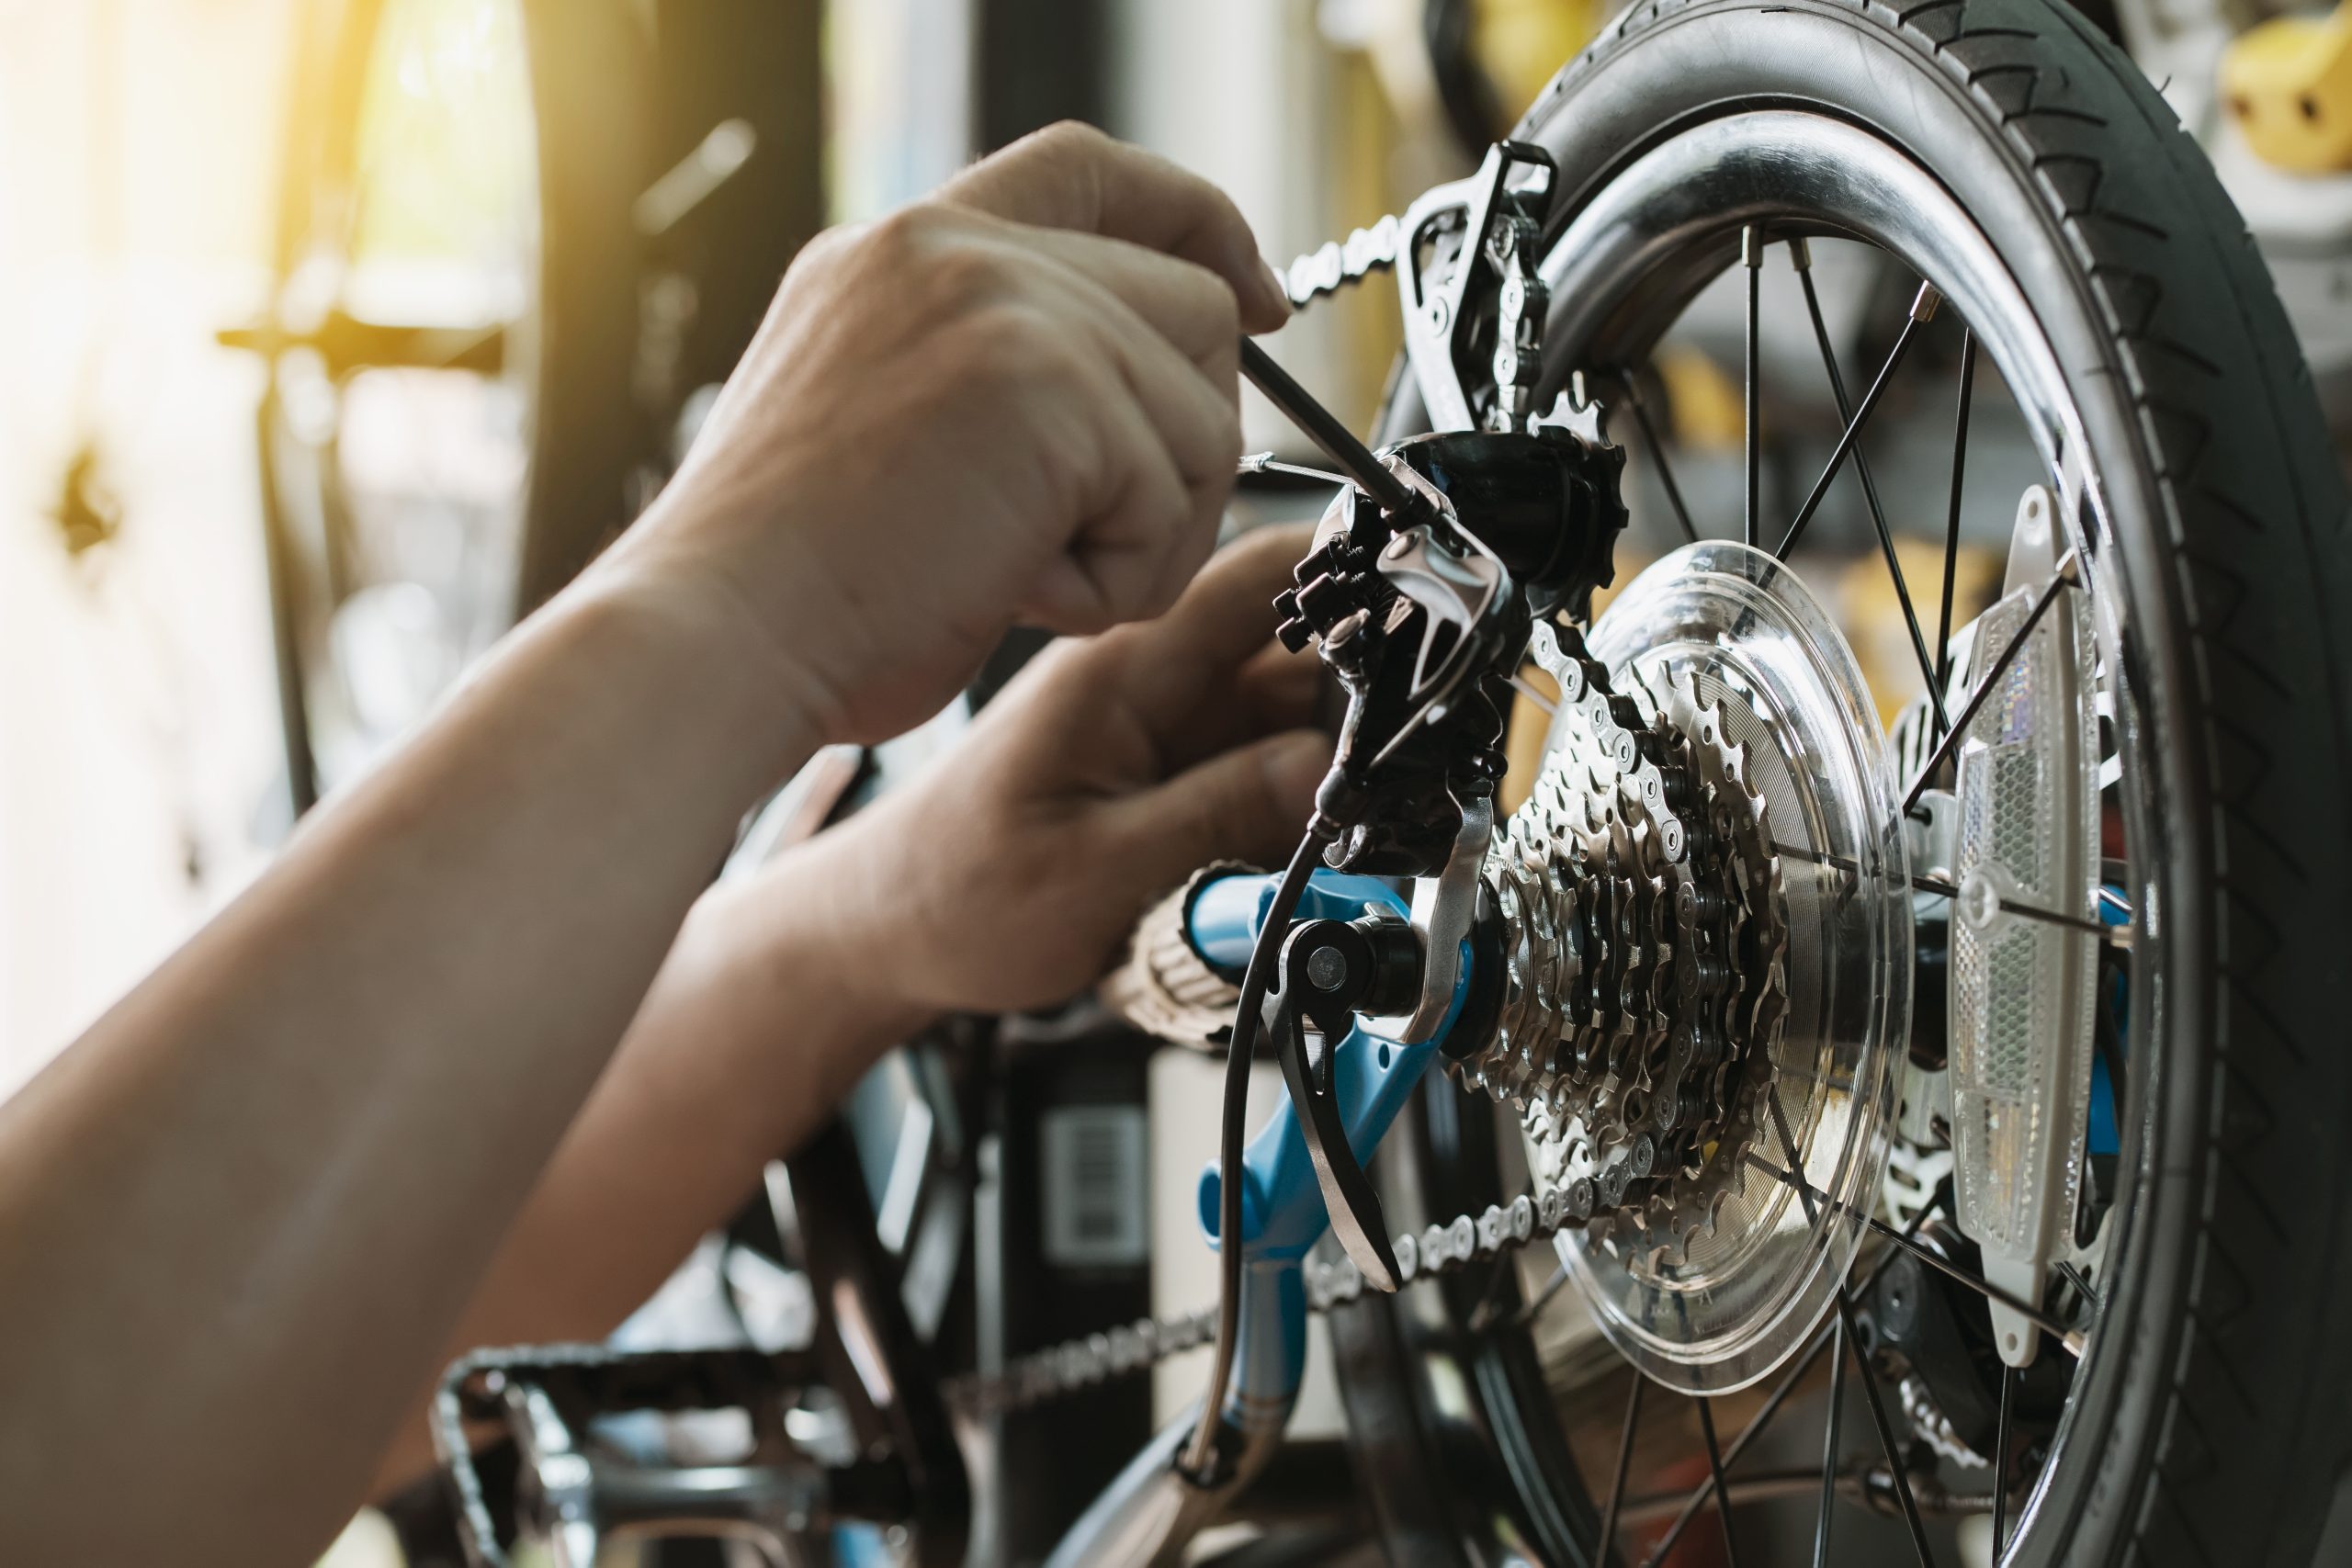 How to Tune Up a Bike: A Complete Guide to Bike Maintenance